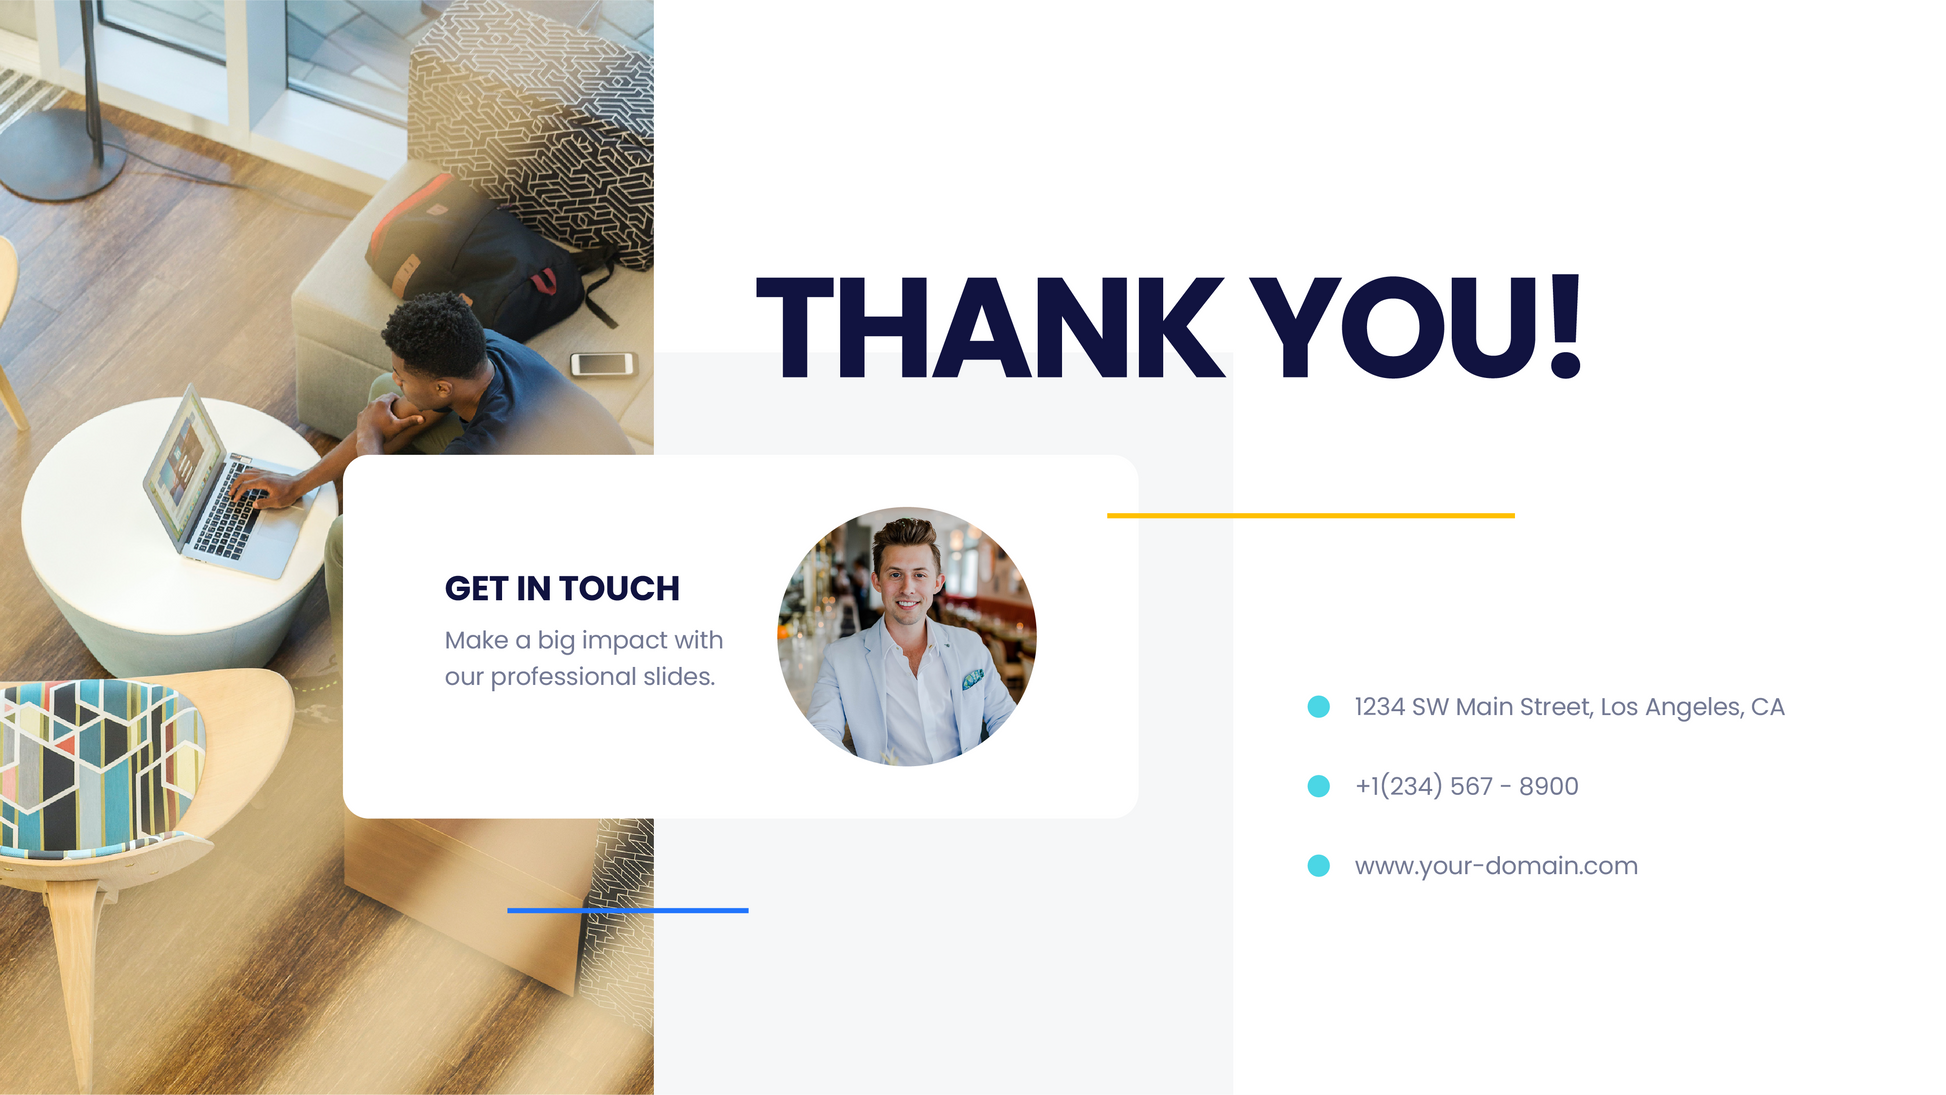 Thank You Infographic templates